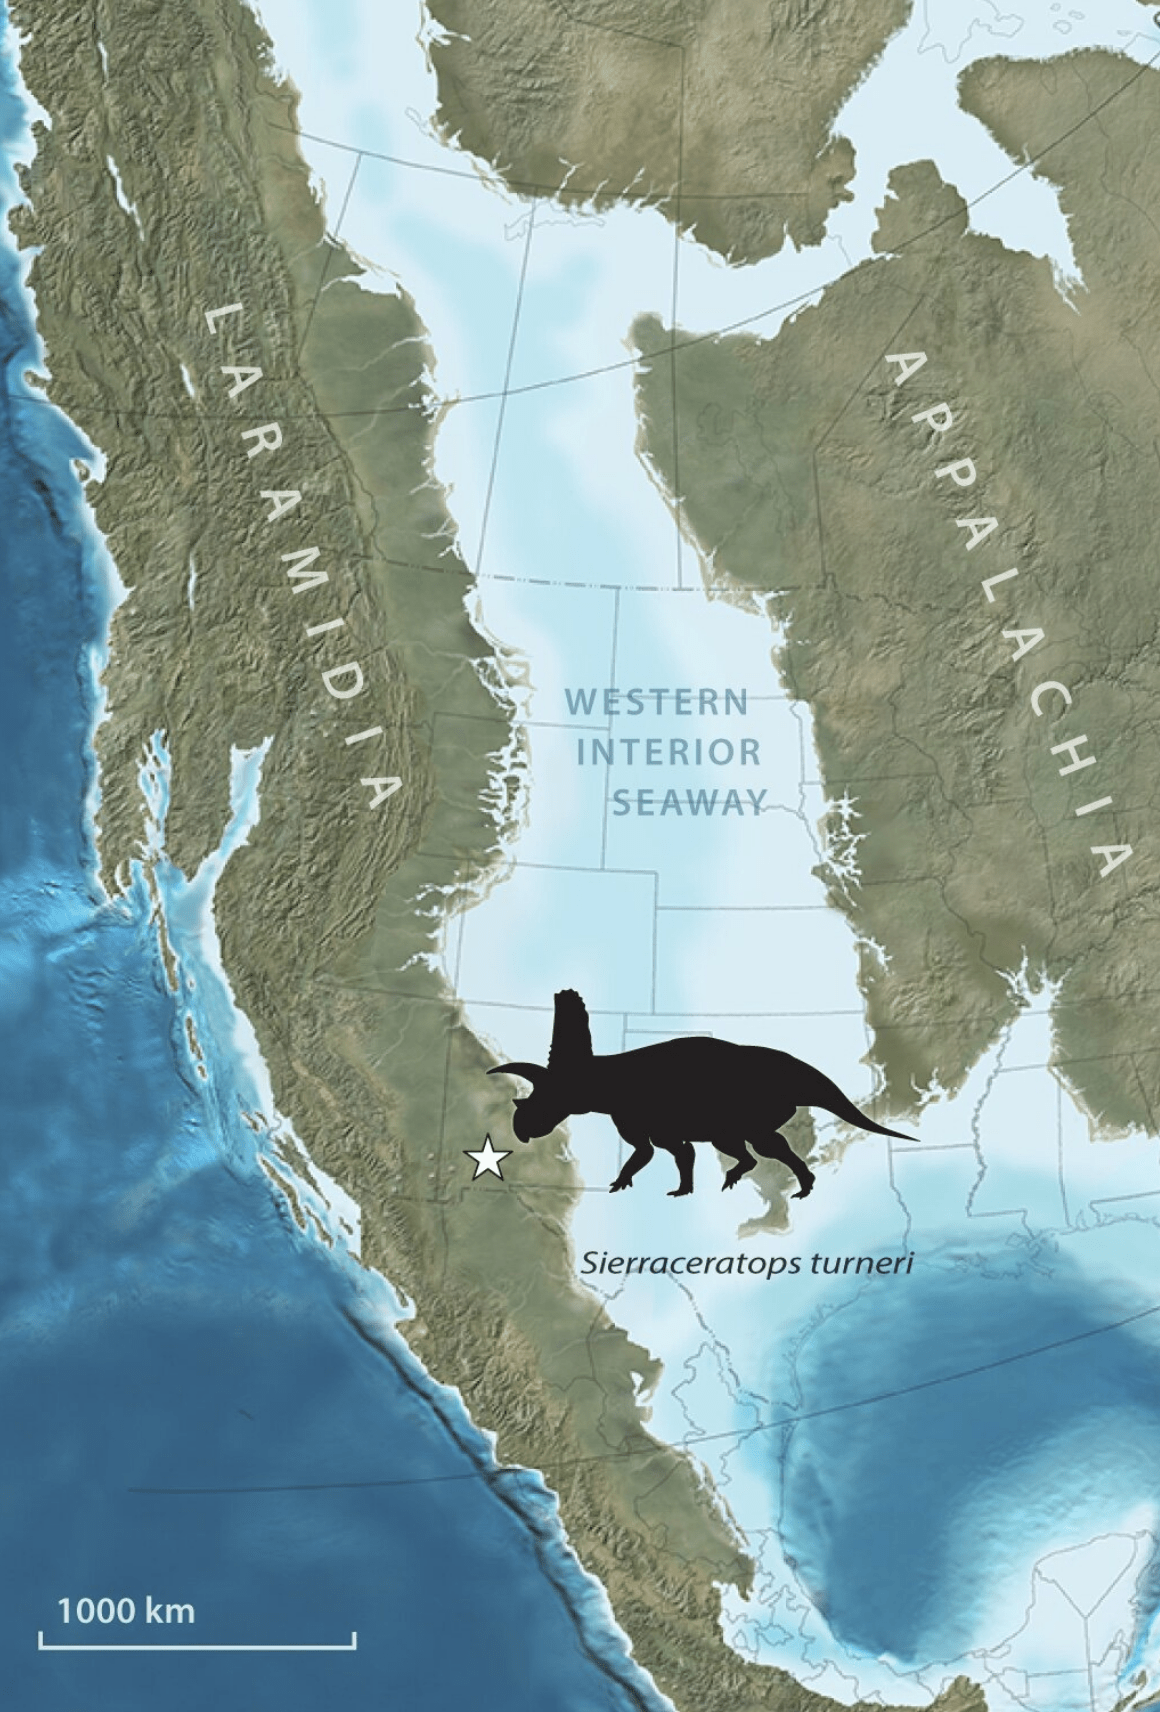 Sierraceratops lived on a coastal plain to the west of the Western Interior Seaway.  (Image: Nick Longrich)